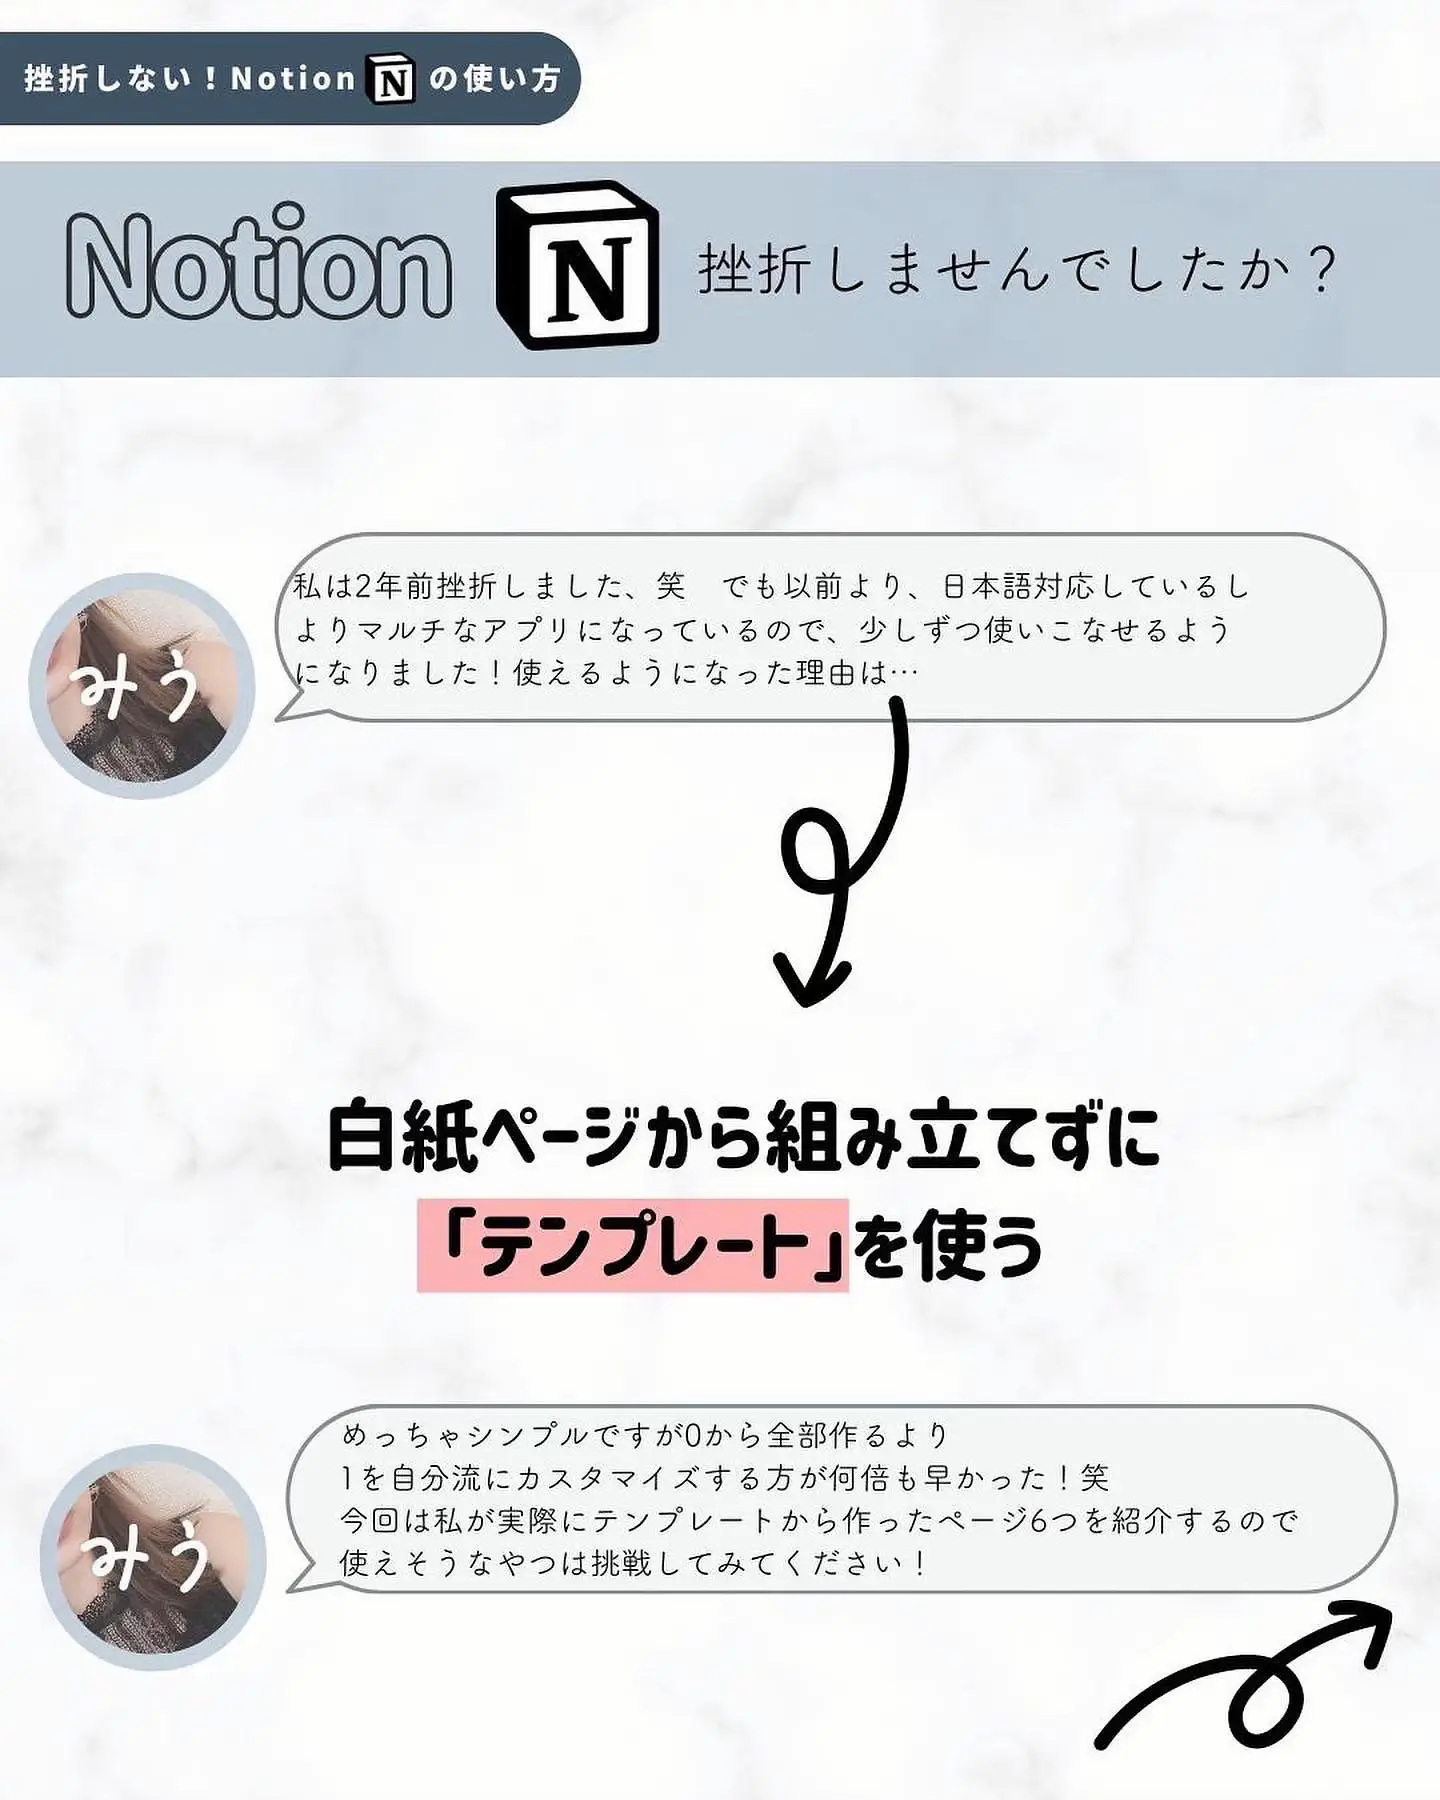 Getting Started with Notion - Lemon8検索